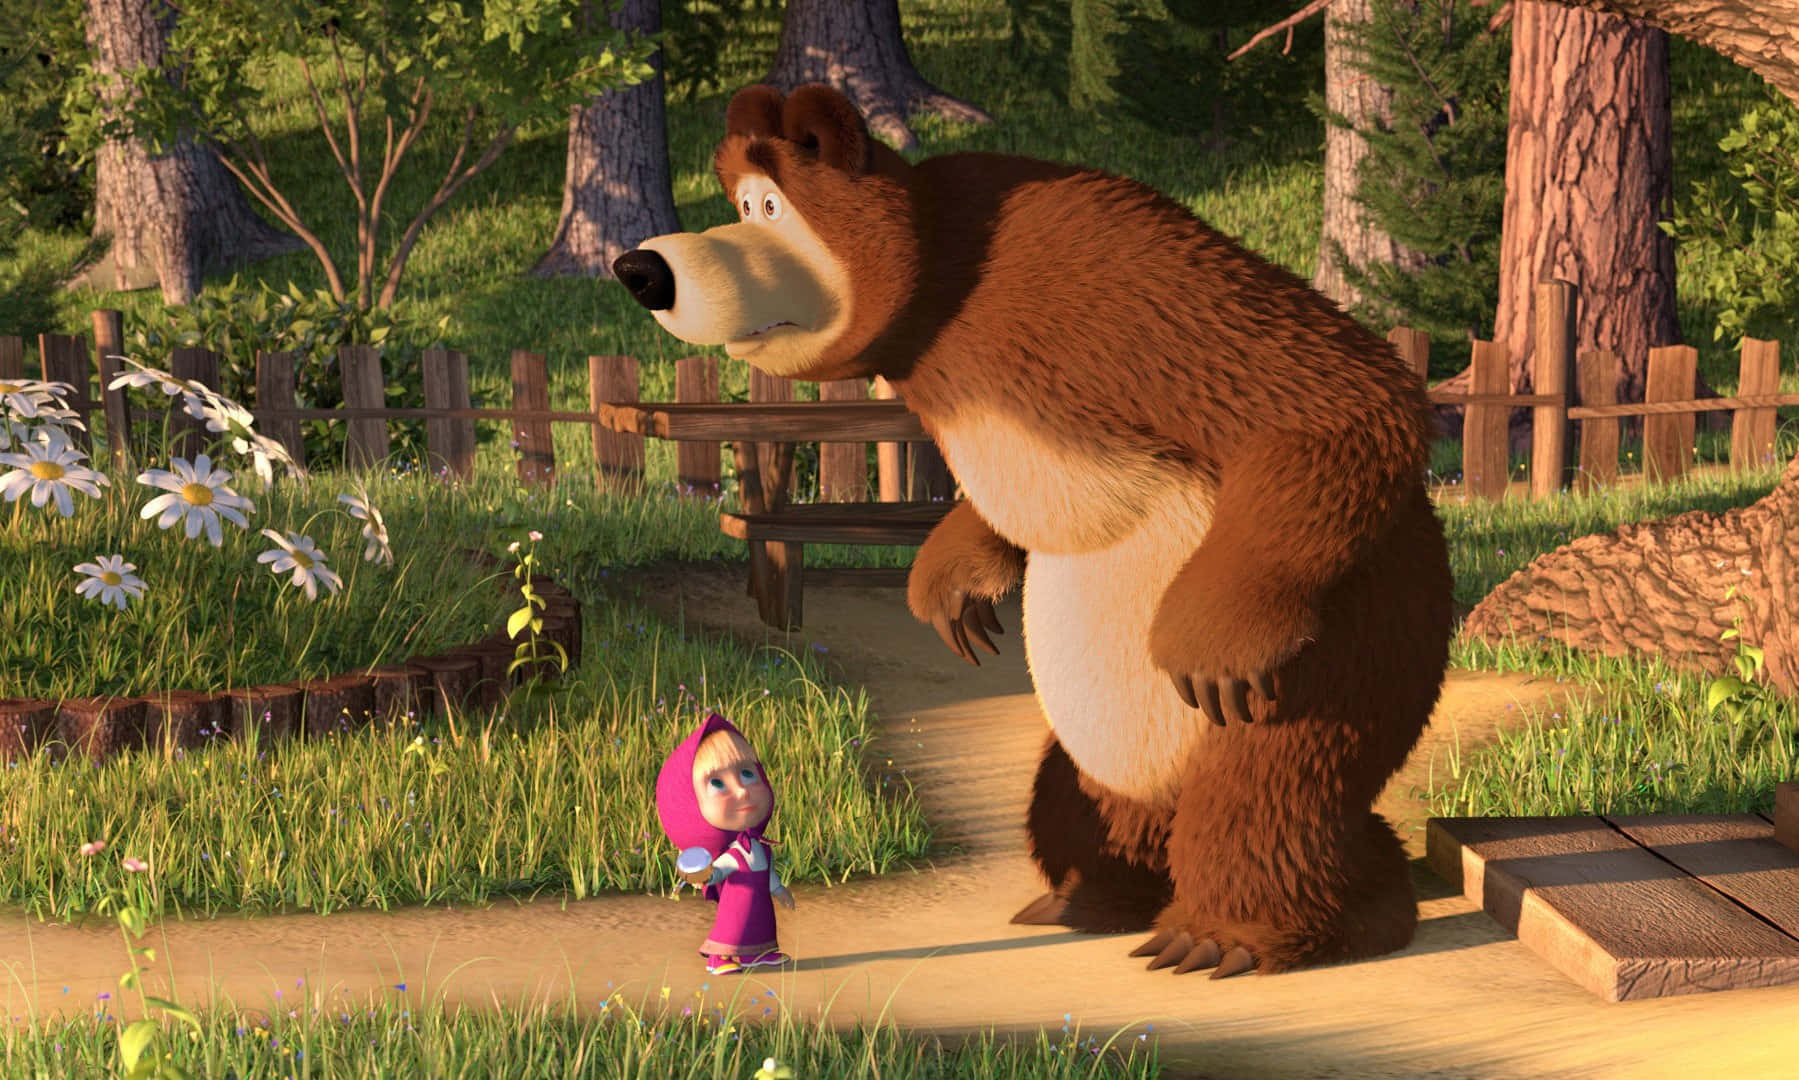 Masha and the Bear enjoying a sunny day in the forest